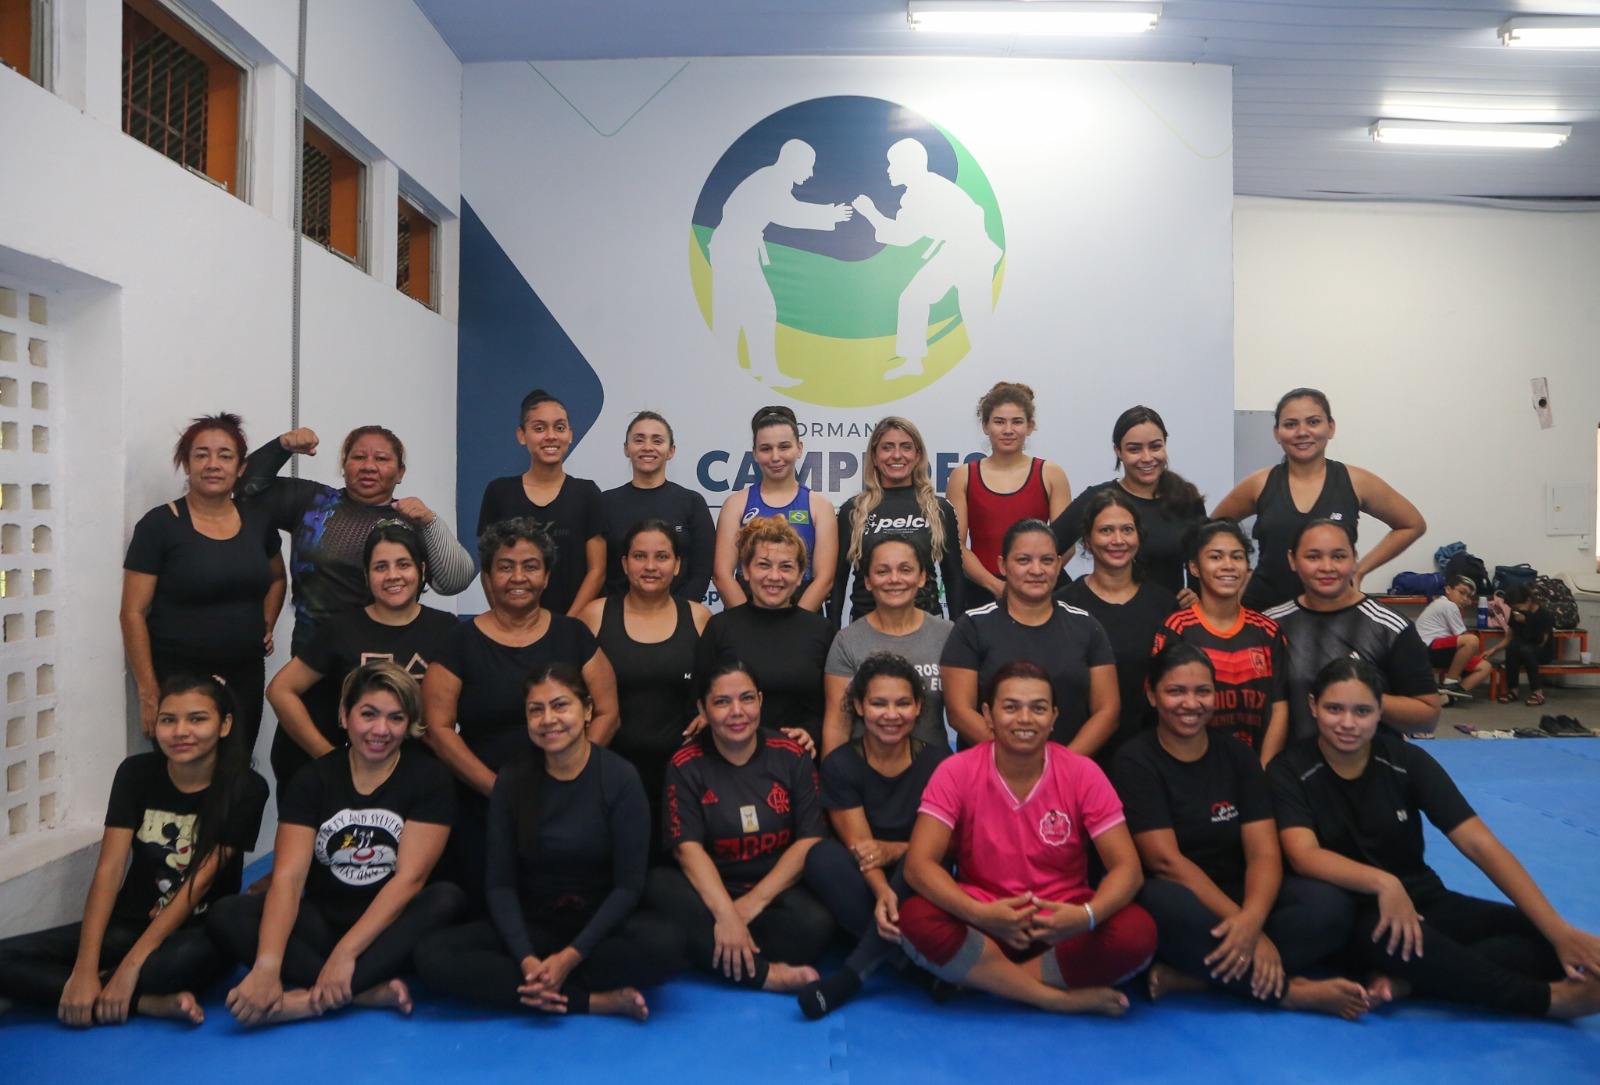 Exclusive center for women at Formando Champions has students from the Self Defense Course